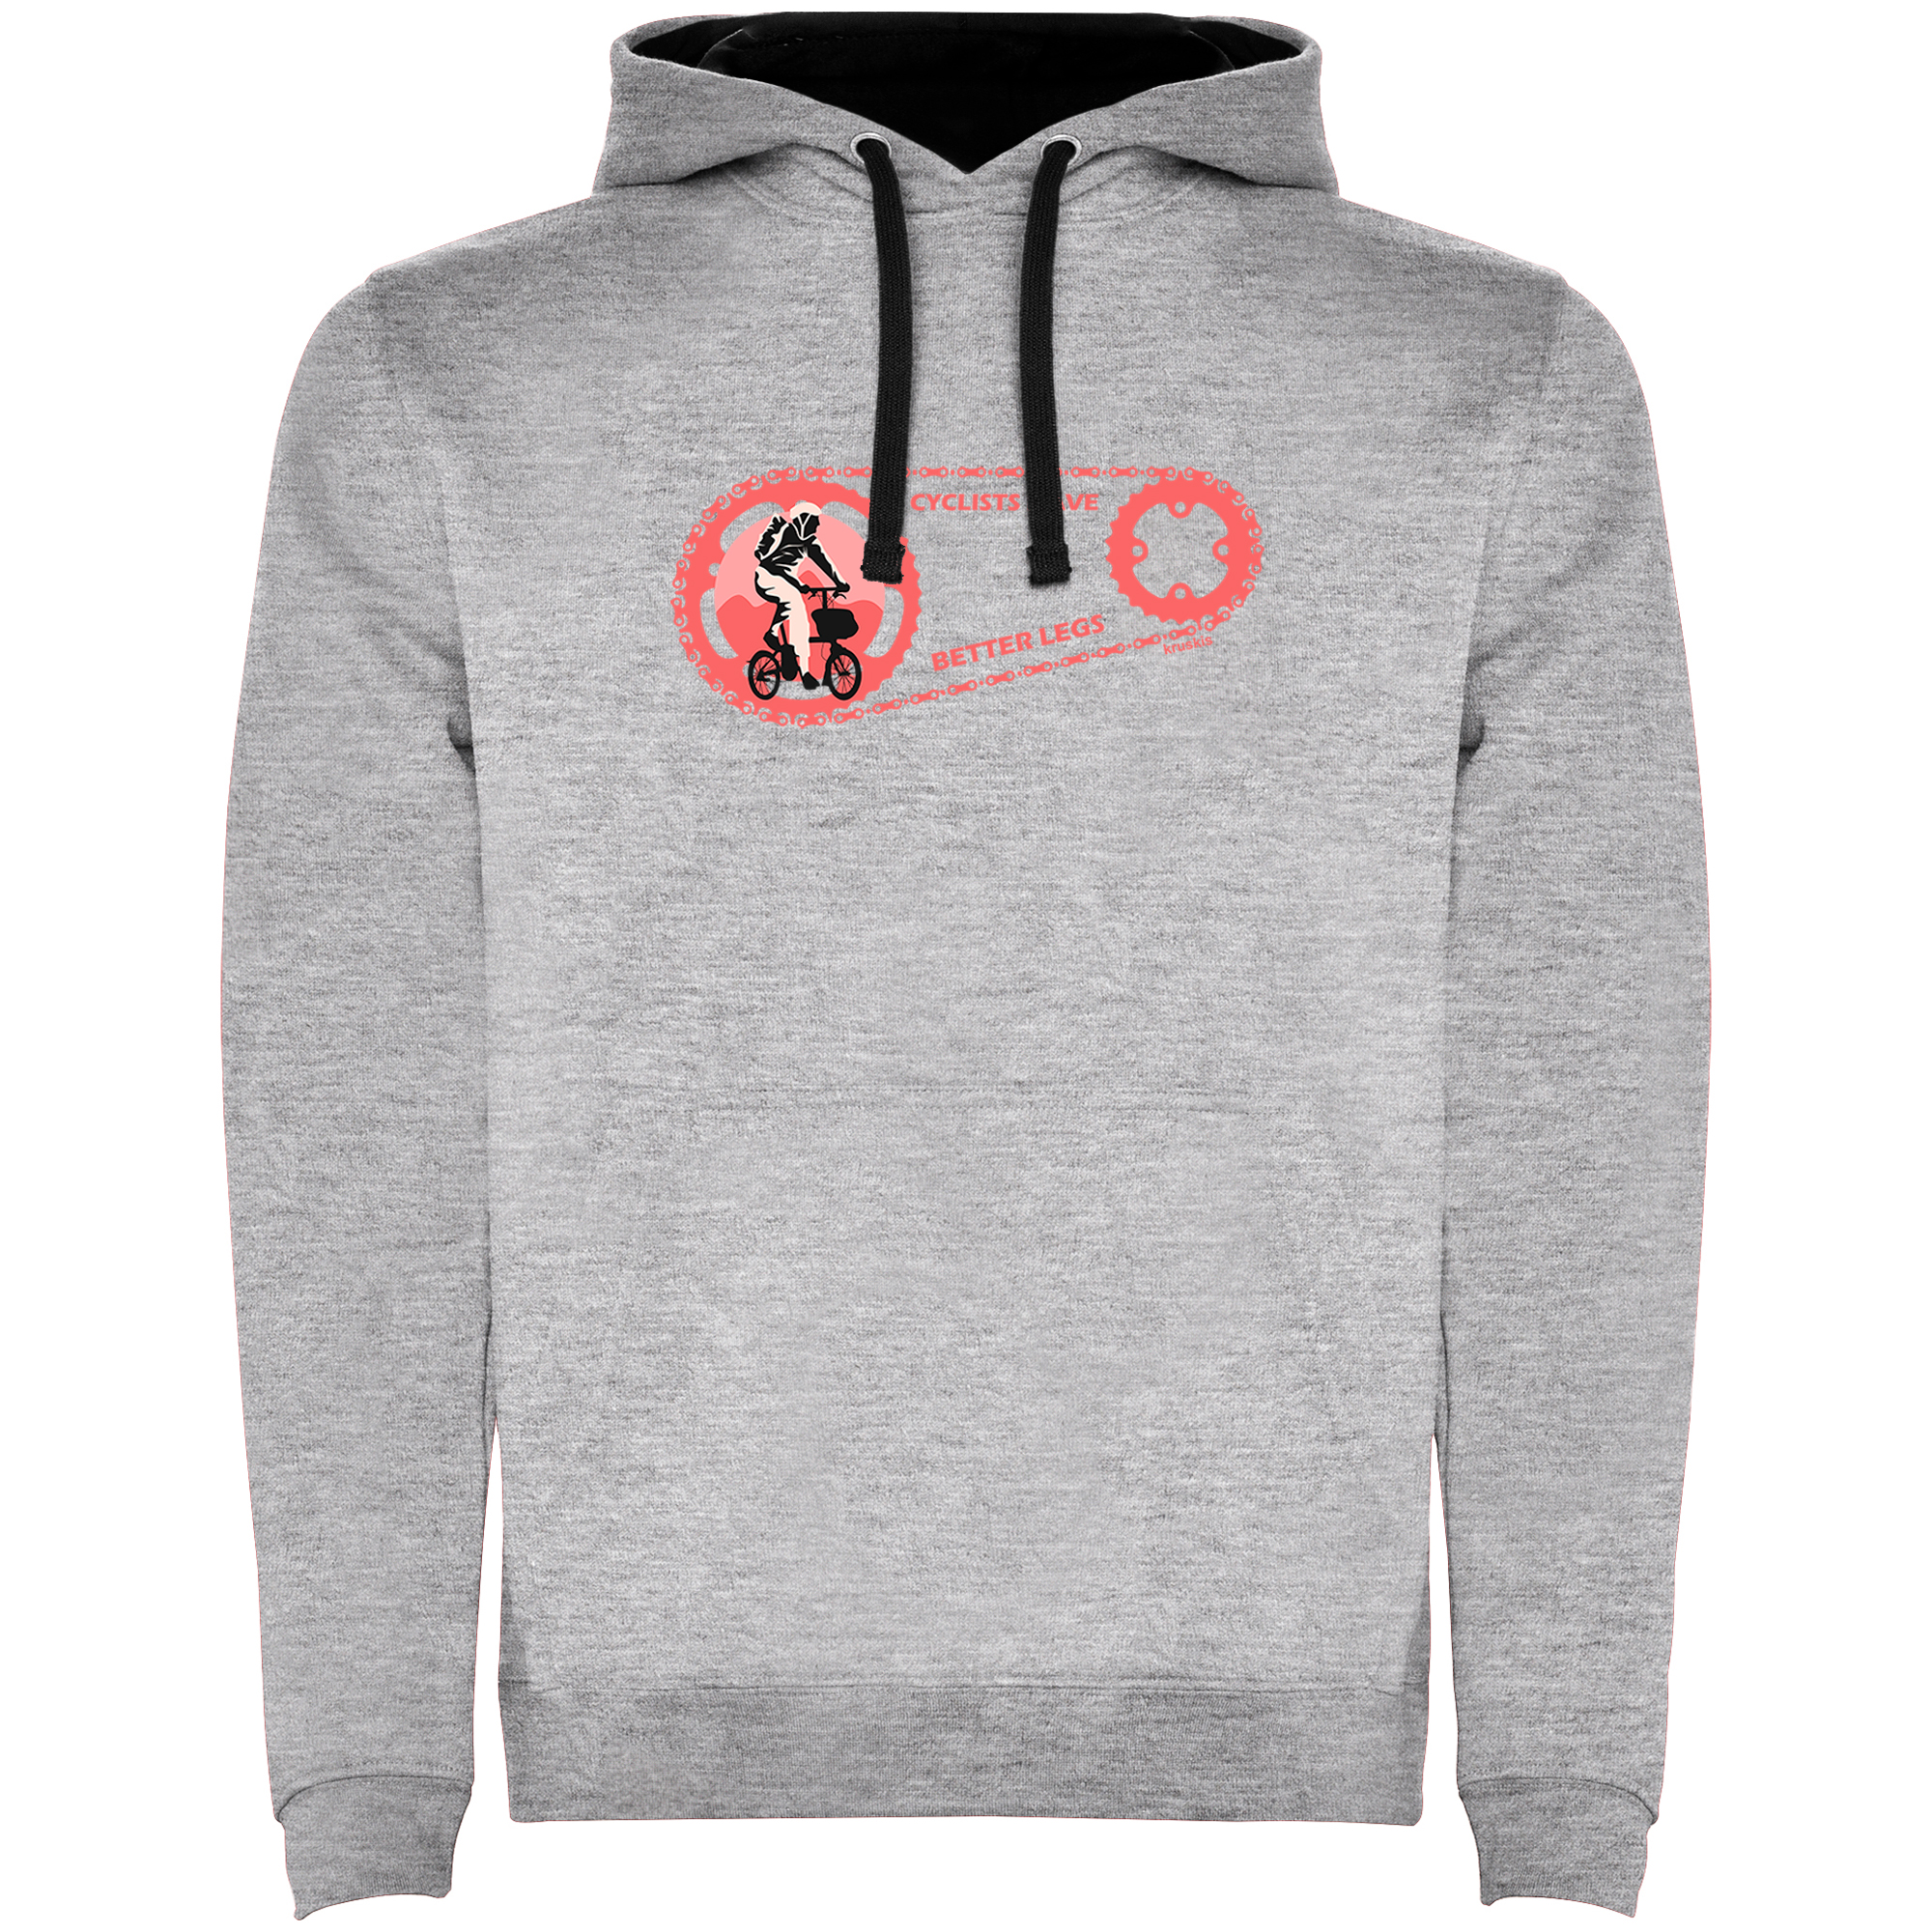 Hoodie Cycling Cyclists Have Better Legs Unisex